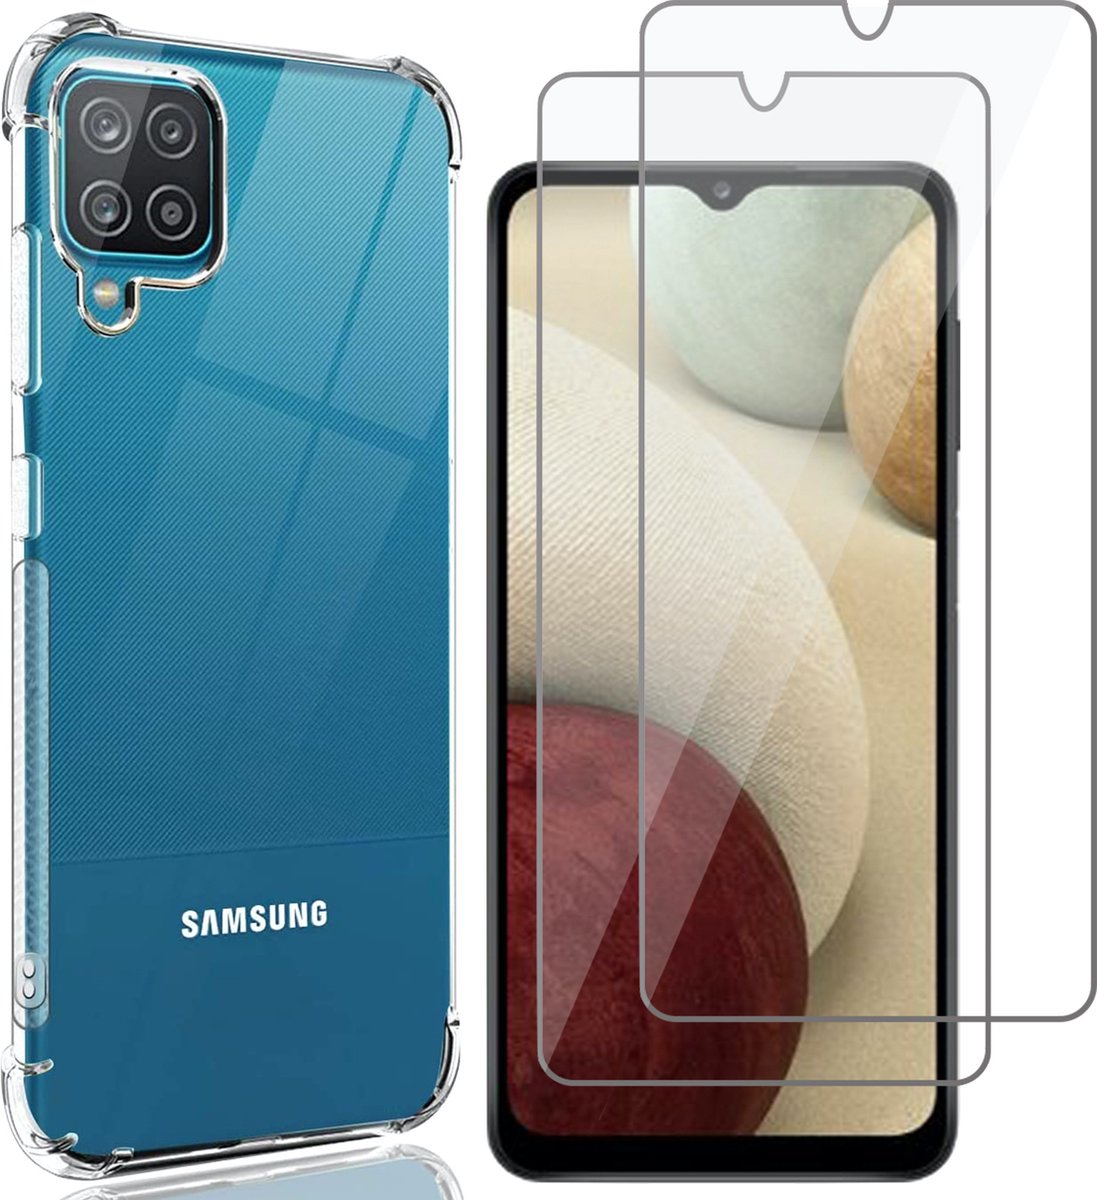 Hoesje geschikt voor Samsung Galaxy A12 Back Cover Anti Shock Siliconen Case Transparant Hoes - 2x Screen Protector Gehard Glas Beschermglas Tempered Glass Screenprotector